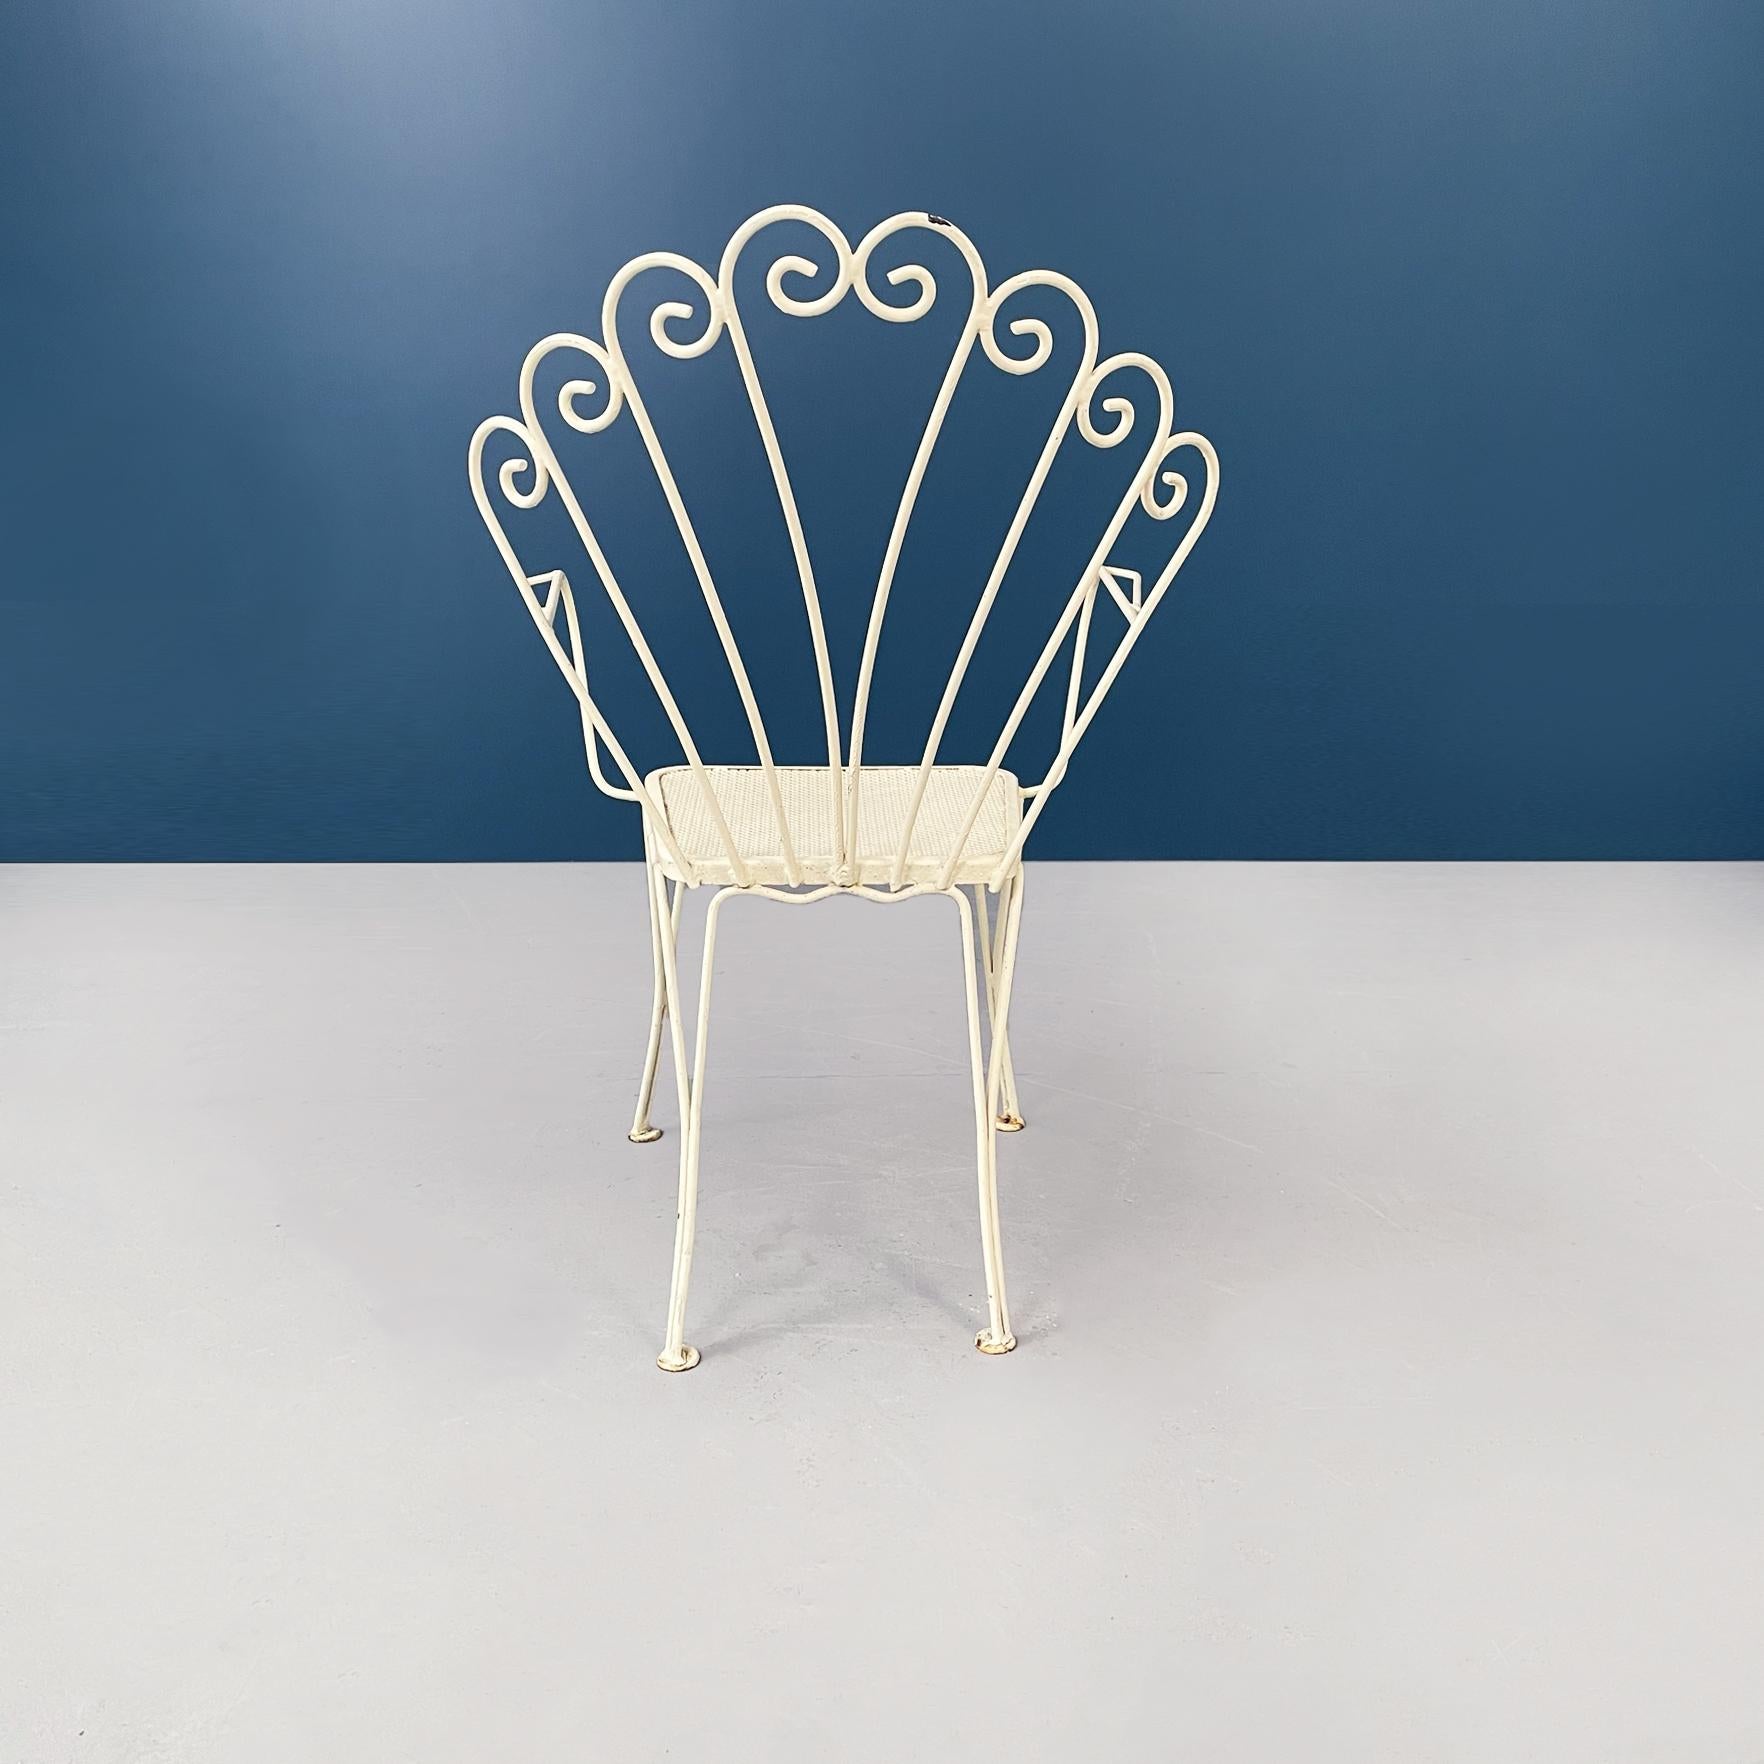 Mid-20th Century Italian Mid-Century Modern Garden Chairs in White Wrought Iron, 1960s For Sale